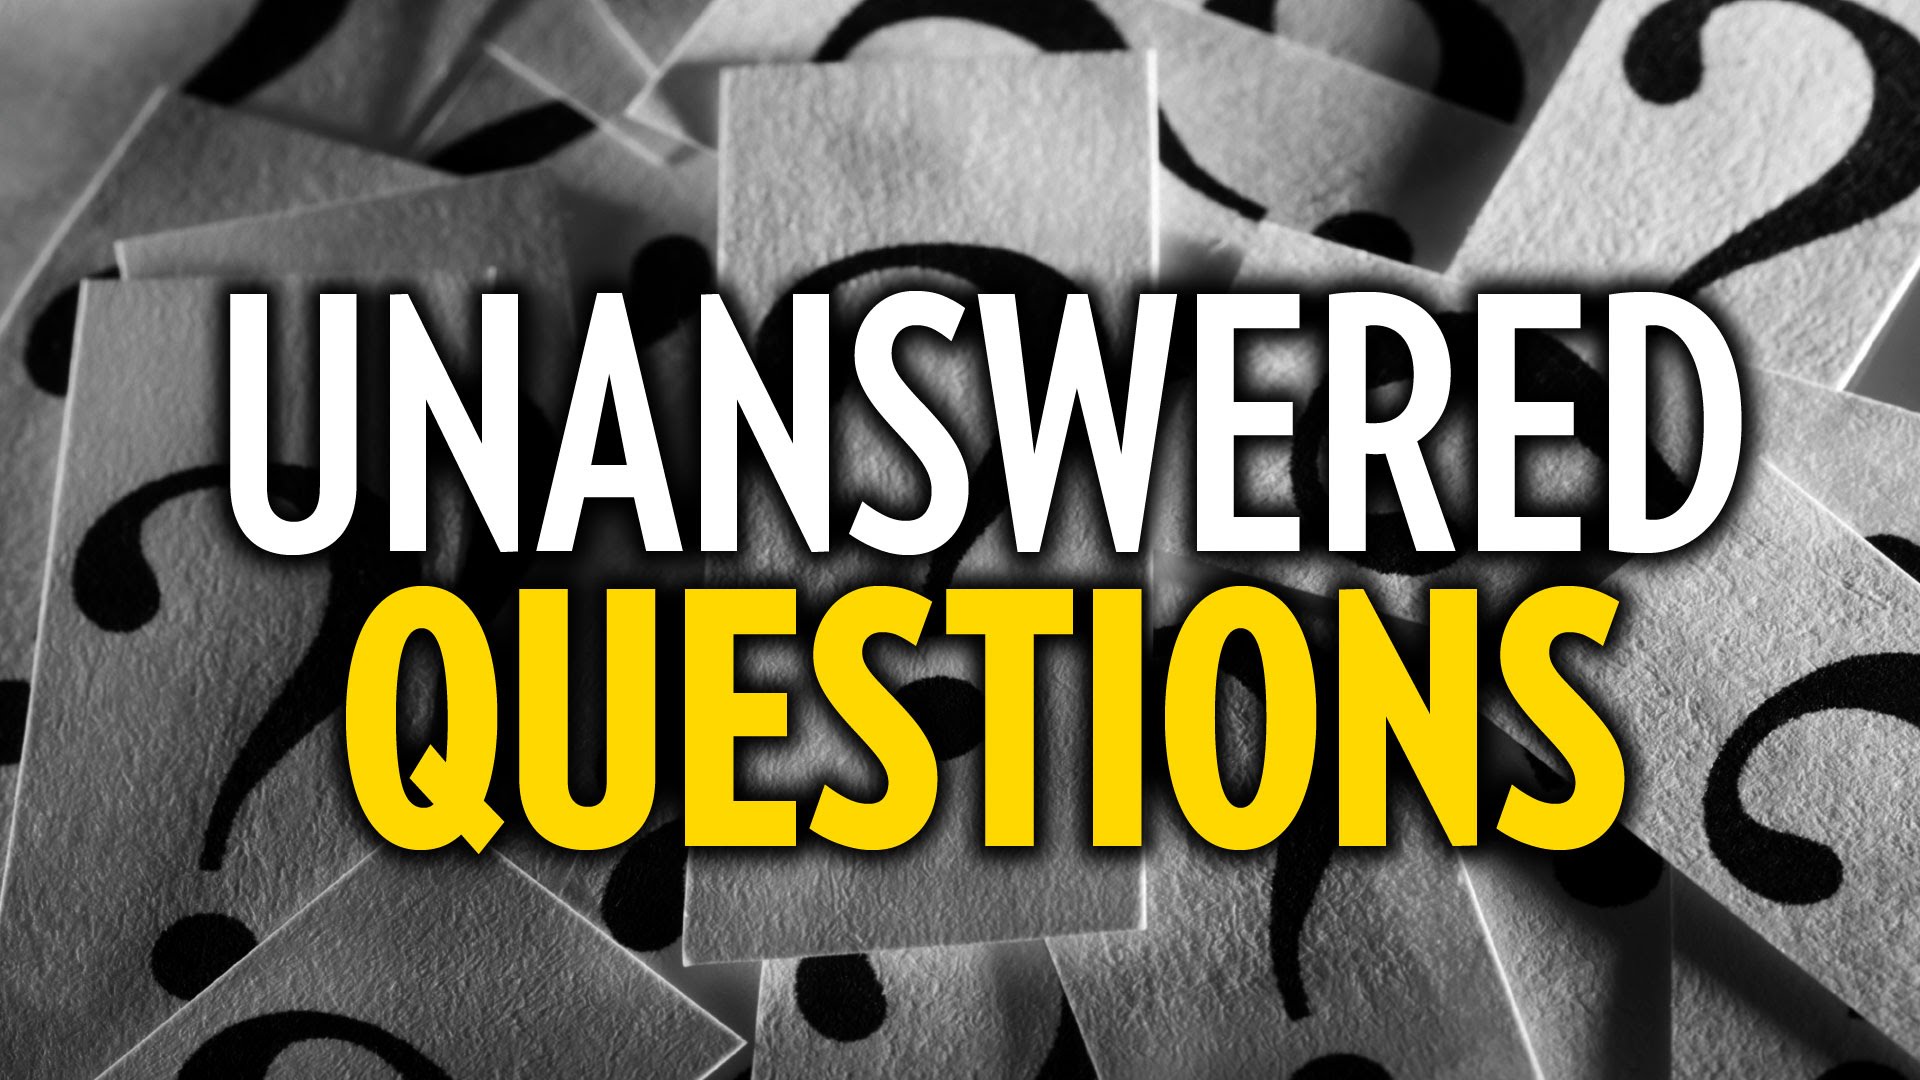 Corinth Baptist Church | Unanswered Questions | 4 Questions